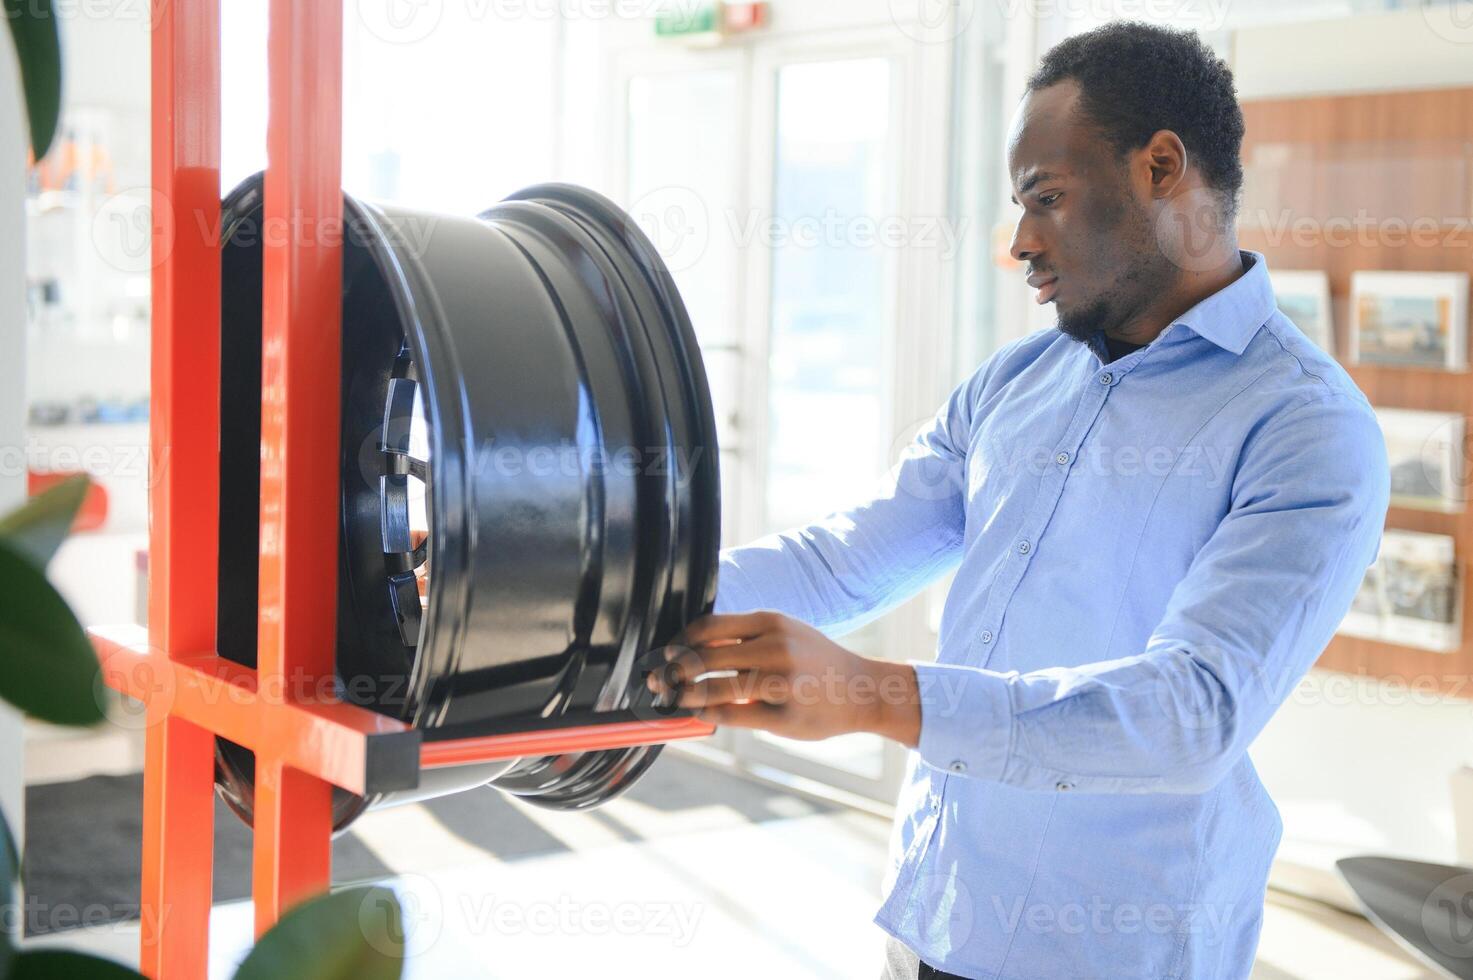 An African man buys car rims in an auto parts store photo